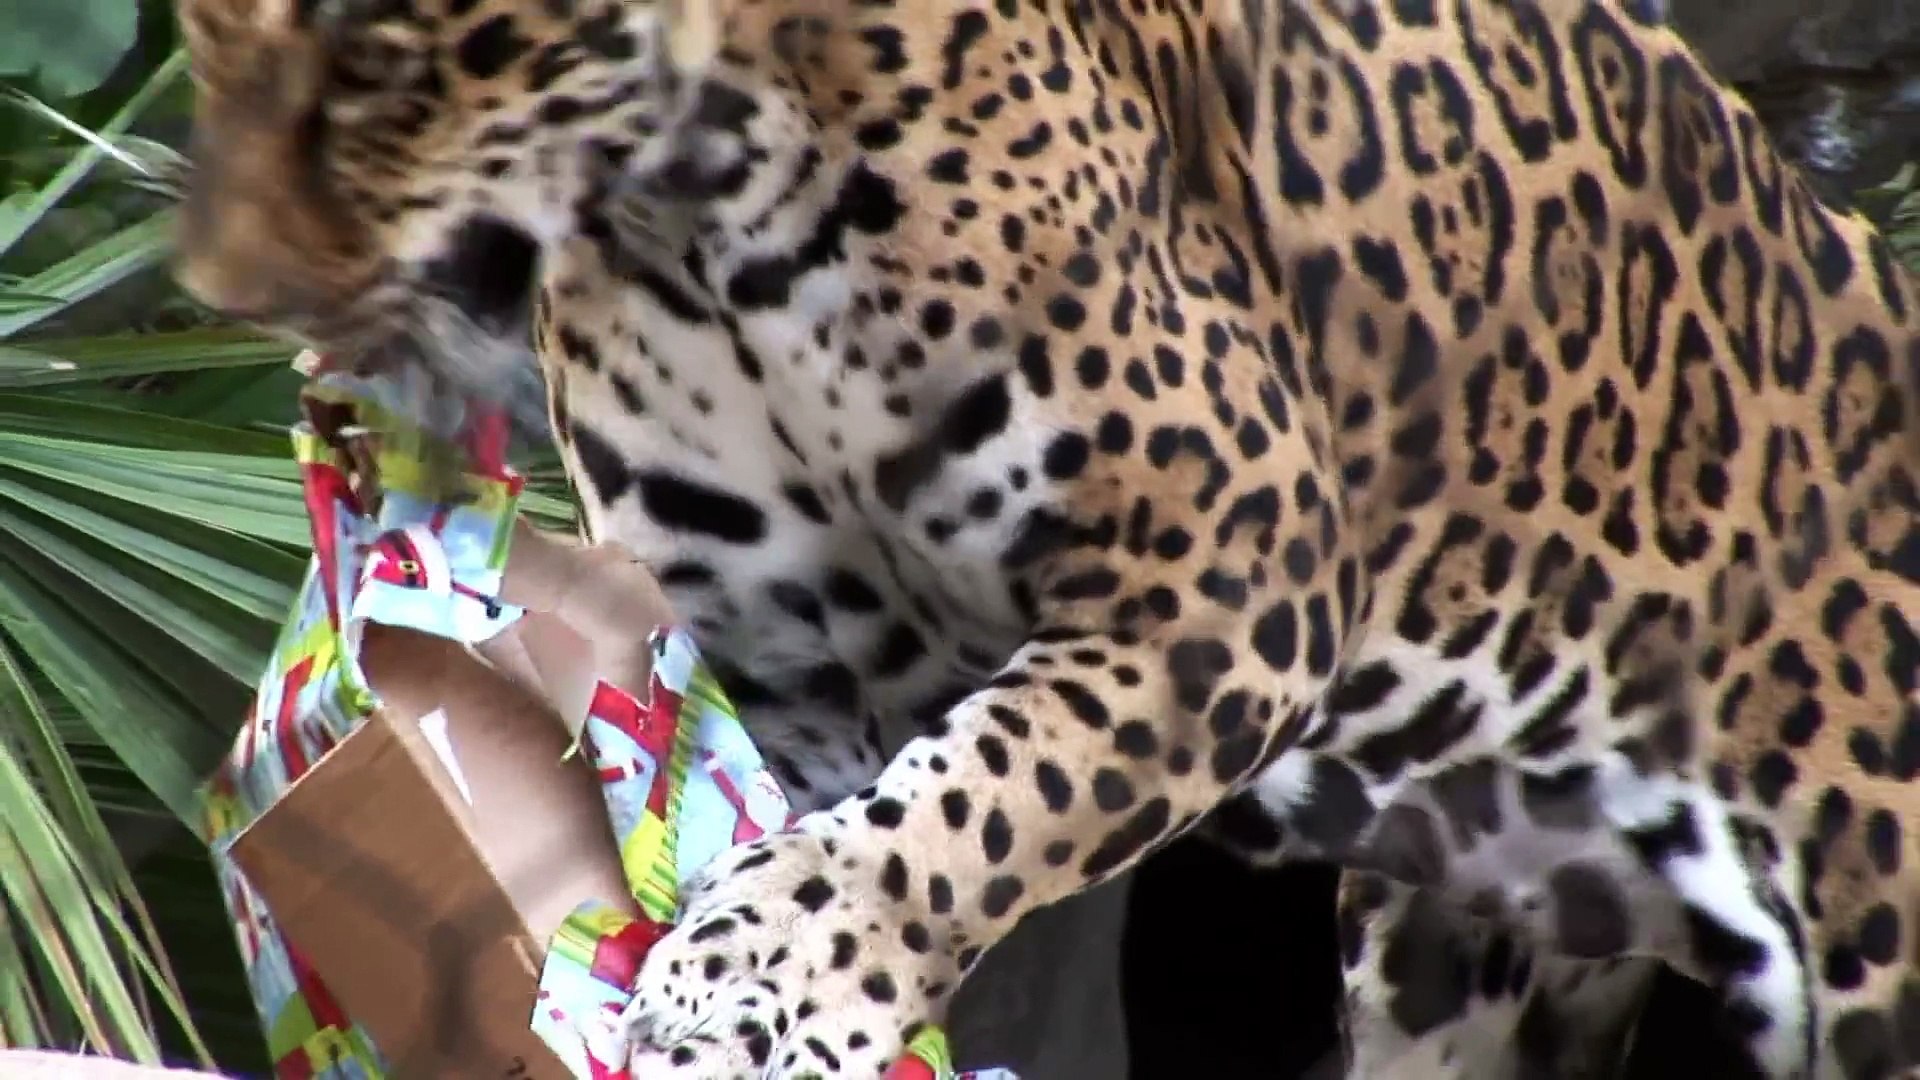 Cats and Orangutans Open Their Presents